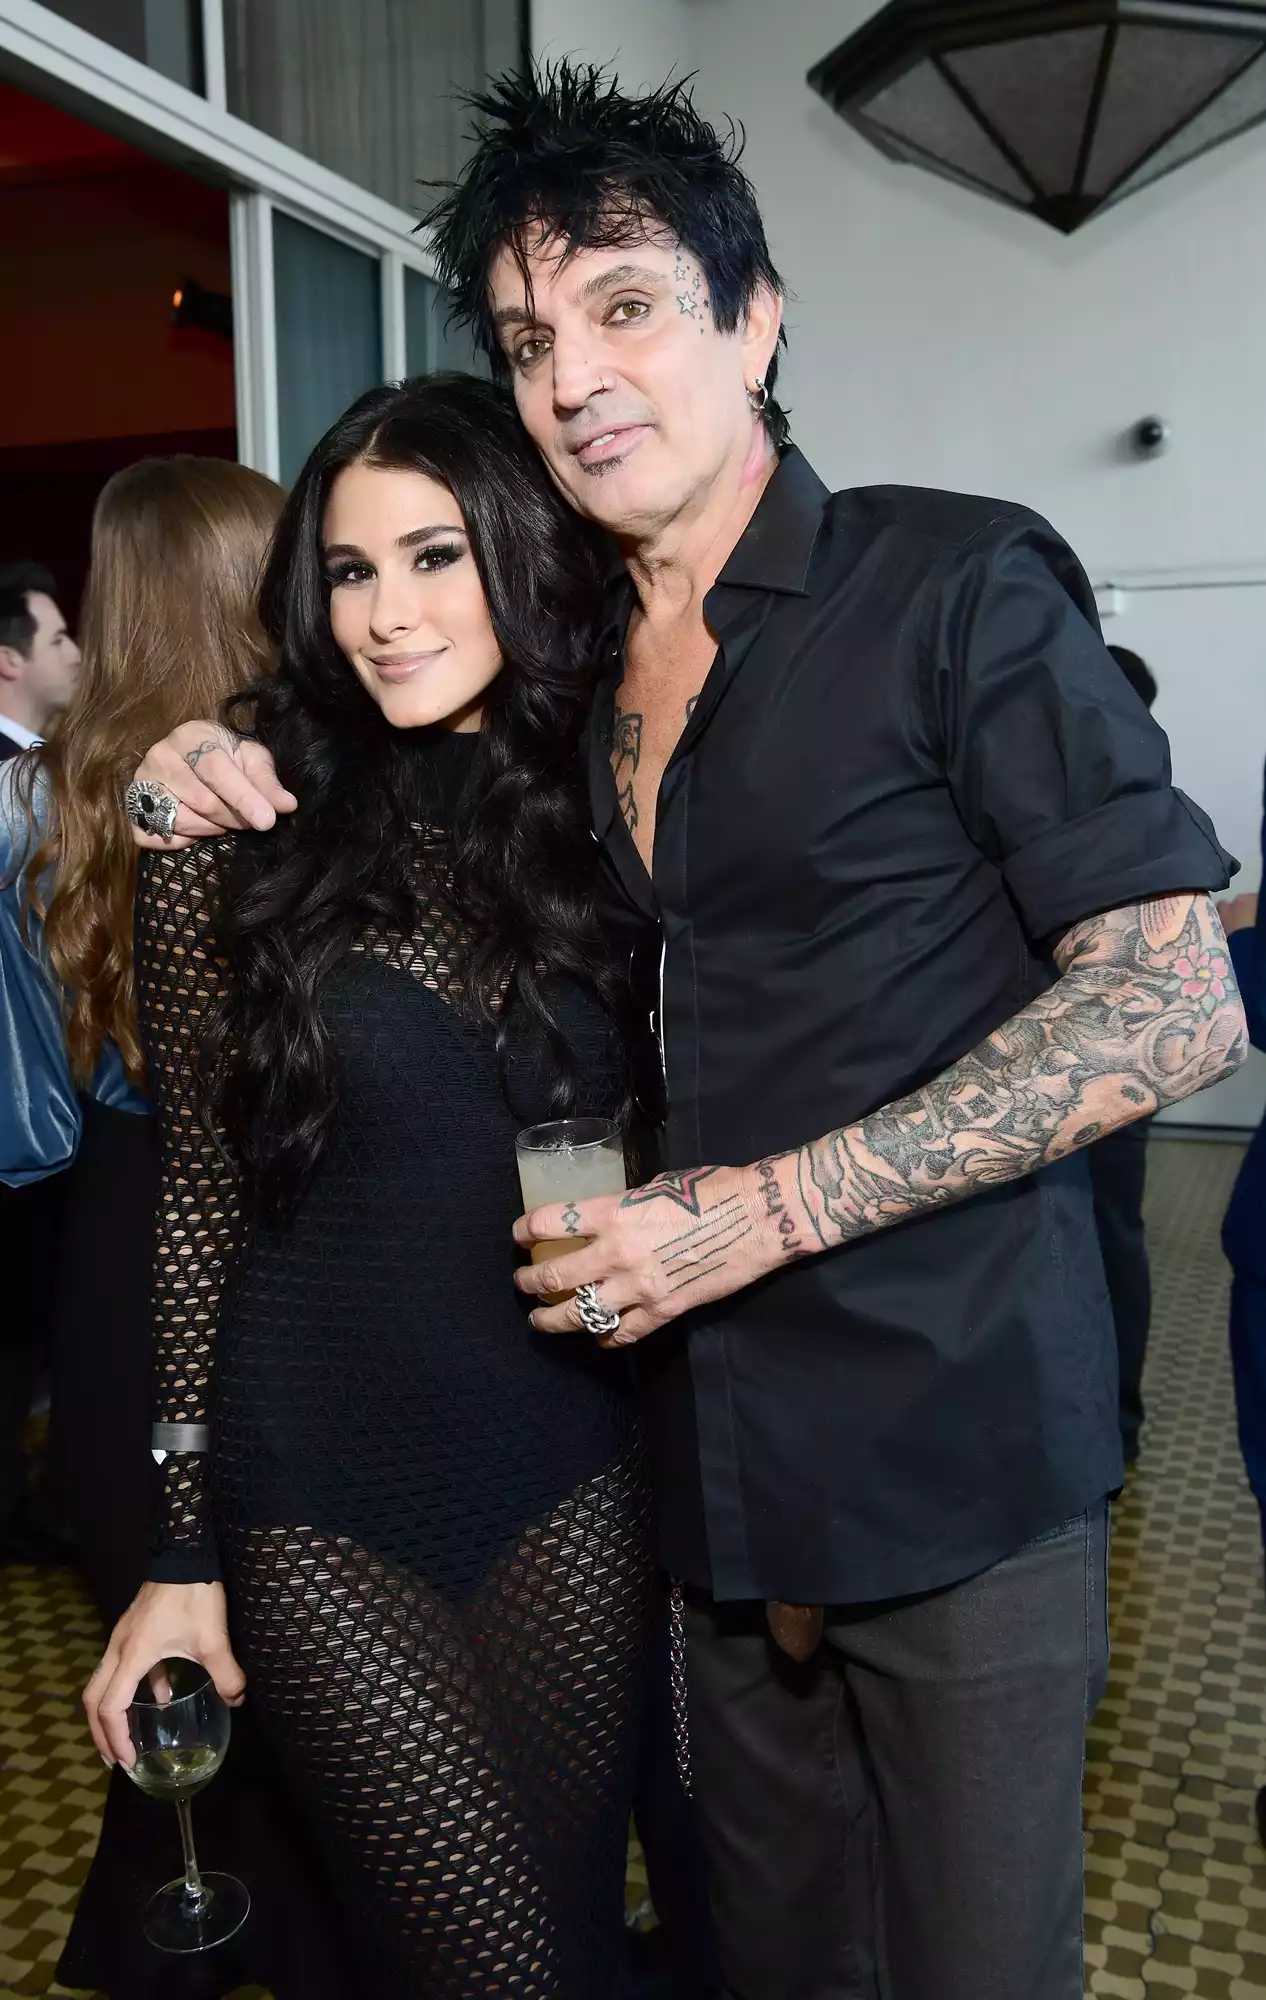 tommy lee children,tommy lee net worth,how old is tommy lees wife,tommy lee age,elaine starchuk,how old is tommy lee&#039;s wife,brittany furlan and tommy lee,tommy lee young,tommy lee and wife 2022,tommy lee and wife 2020,** tommy lee wife 20233,tommy lee and wife 2021,tommy lee wife